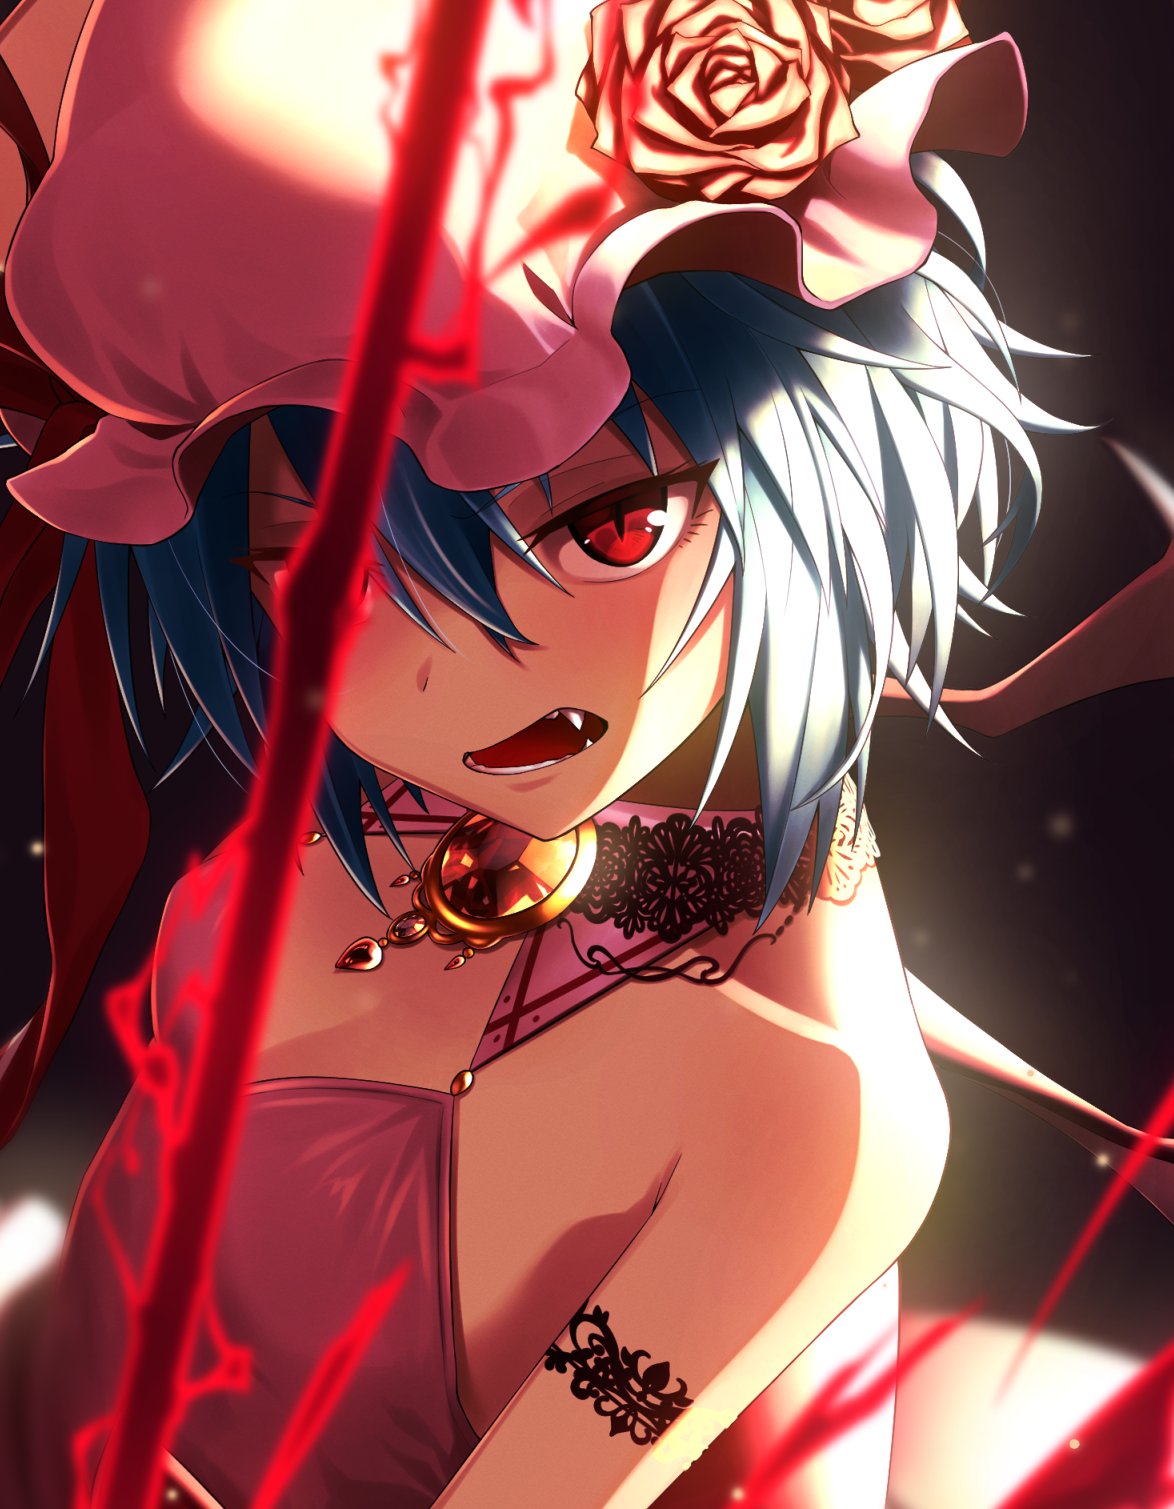 Pretty girl Remilia Scarlet with vampire fang: Touhou Project (Artist: Greenkohgen)